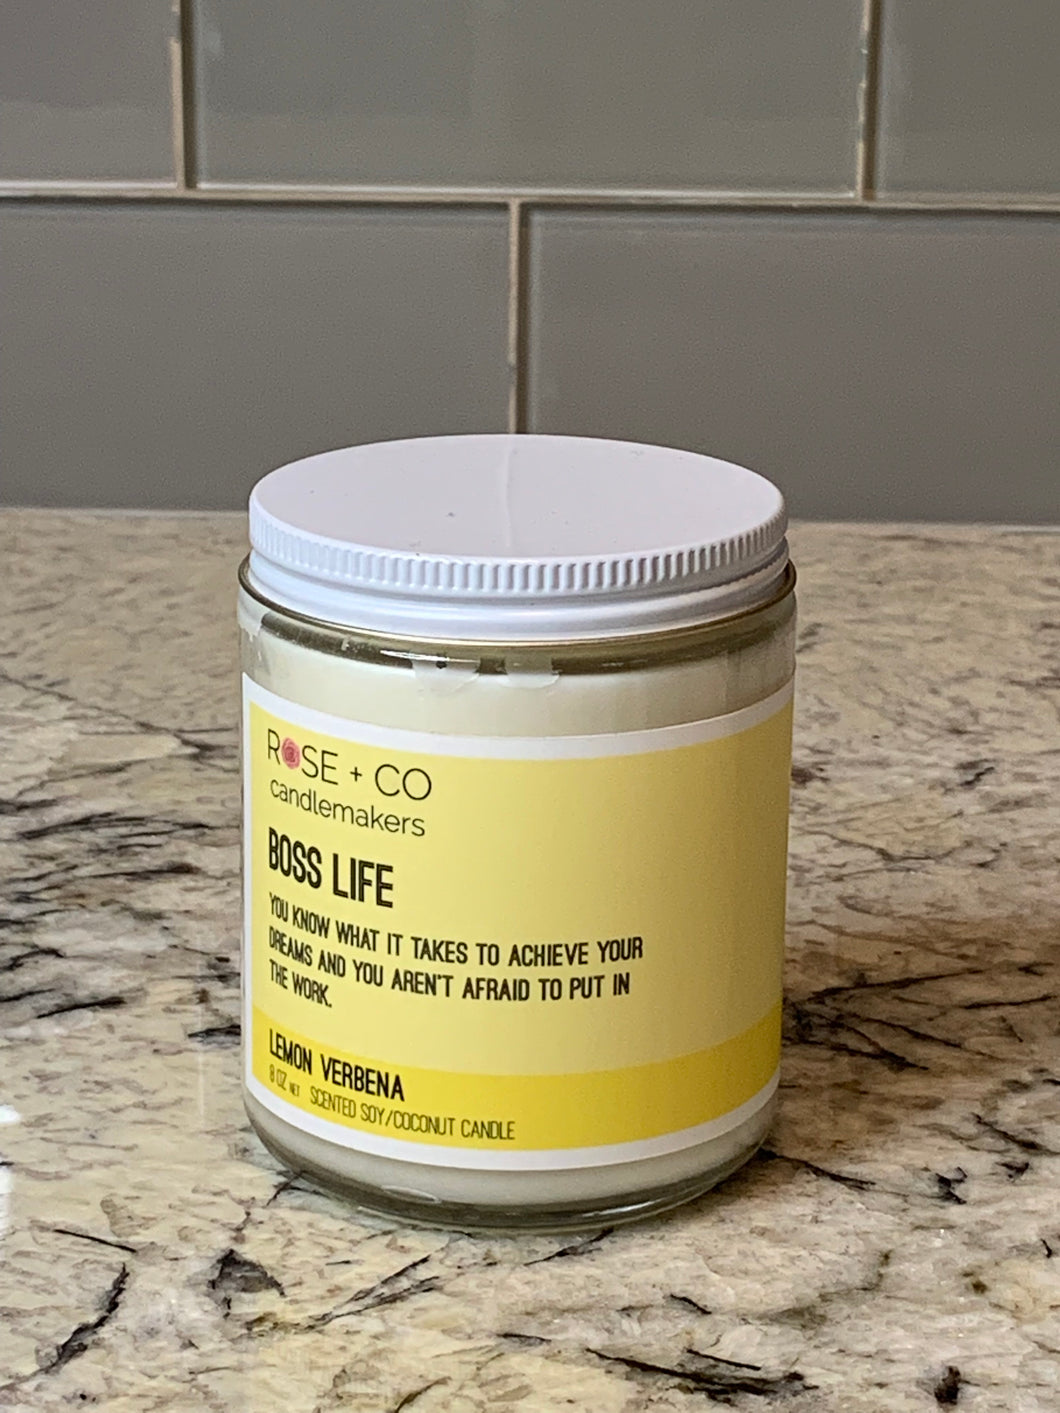 8 oz. Boss Life by Rose + Co.